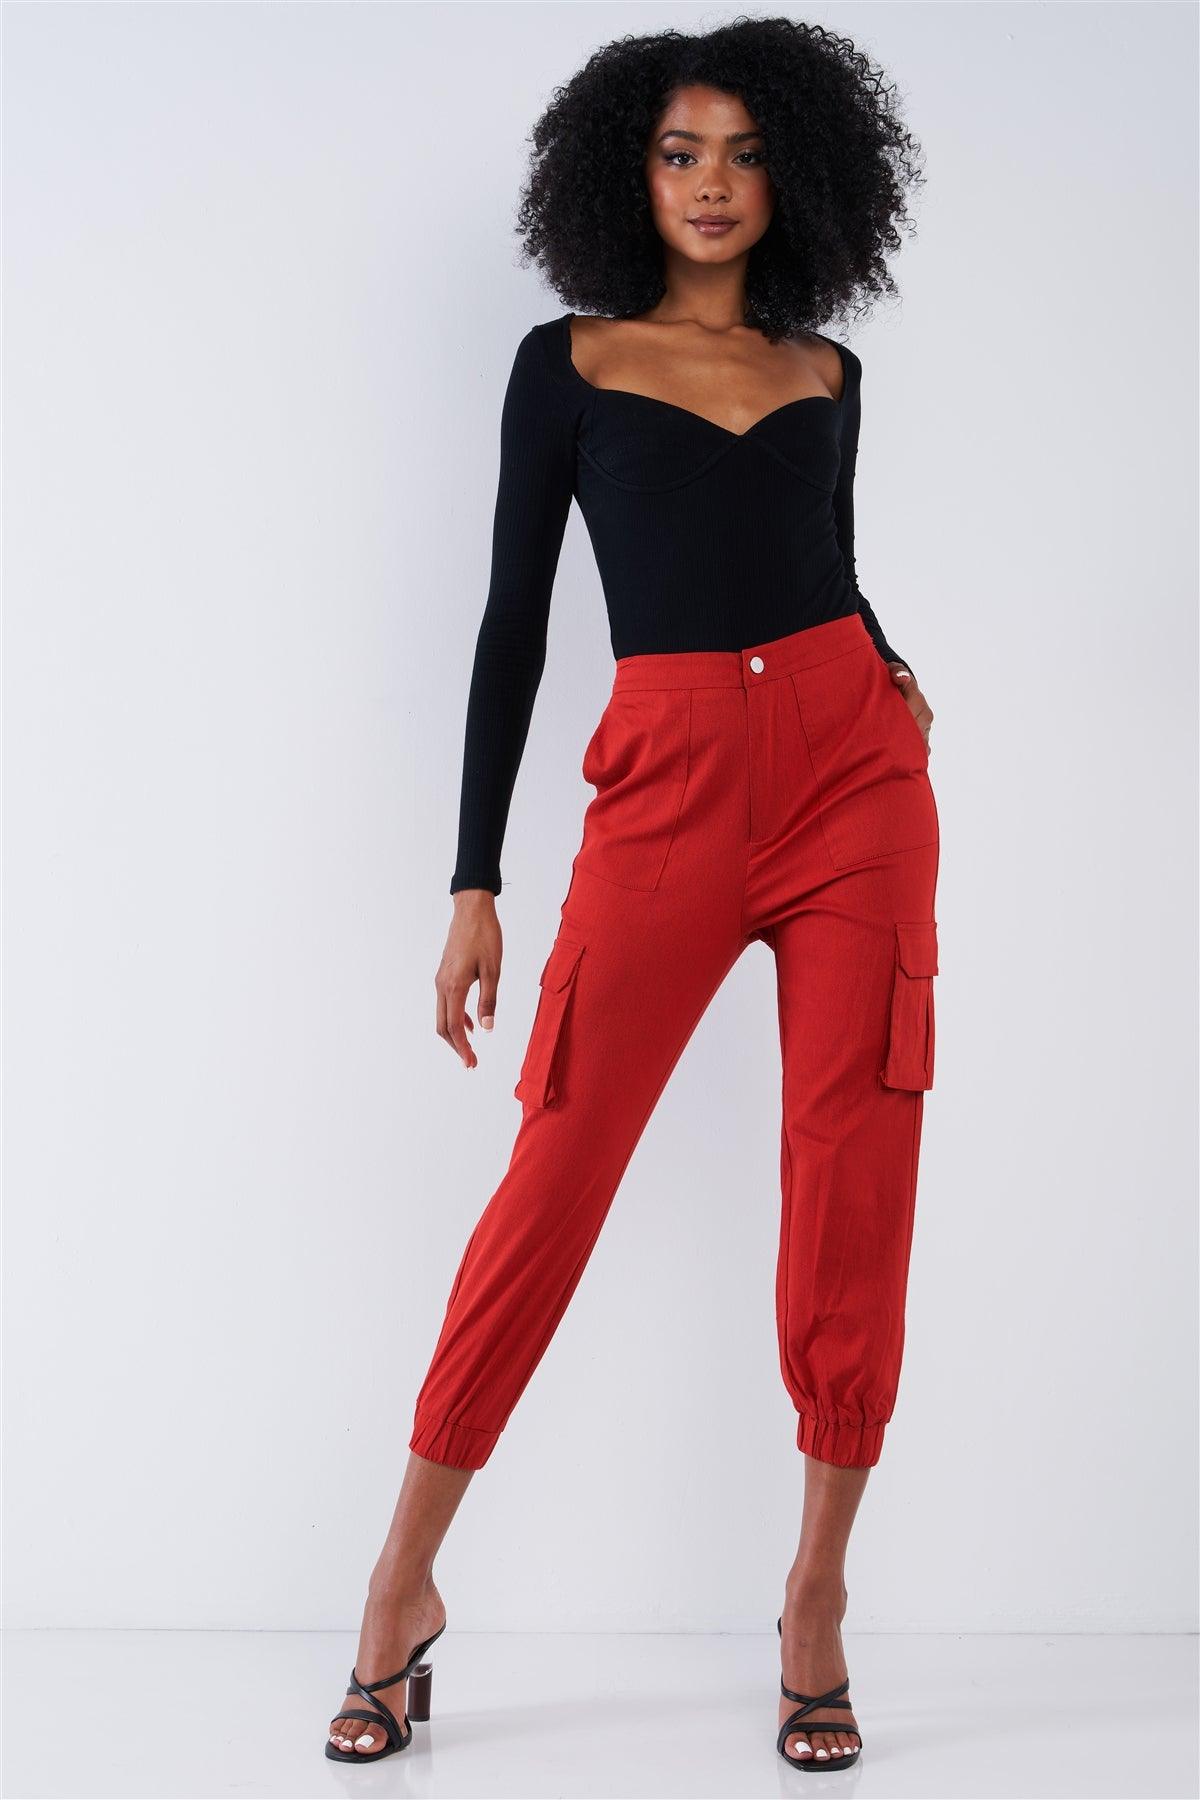 Cherry Red High Waisted Cargo Pocket Jogger Pants